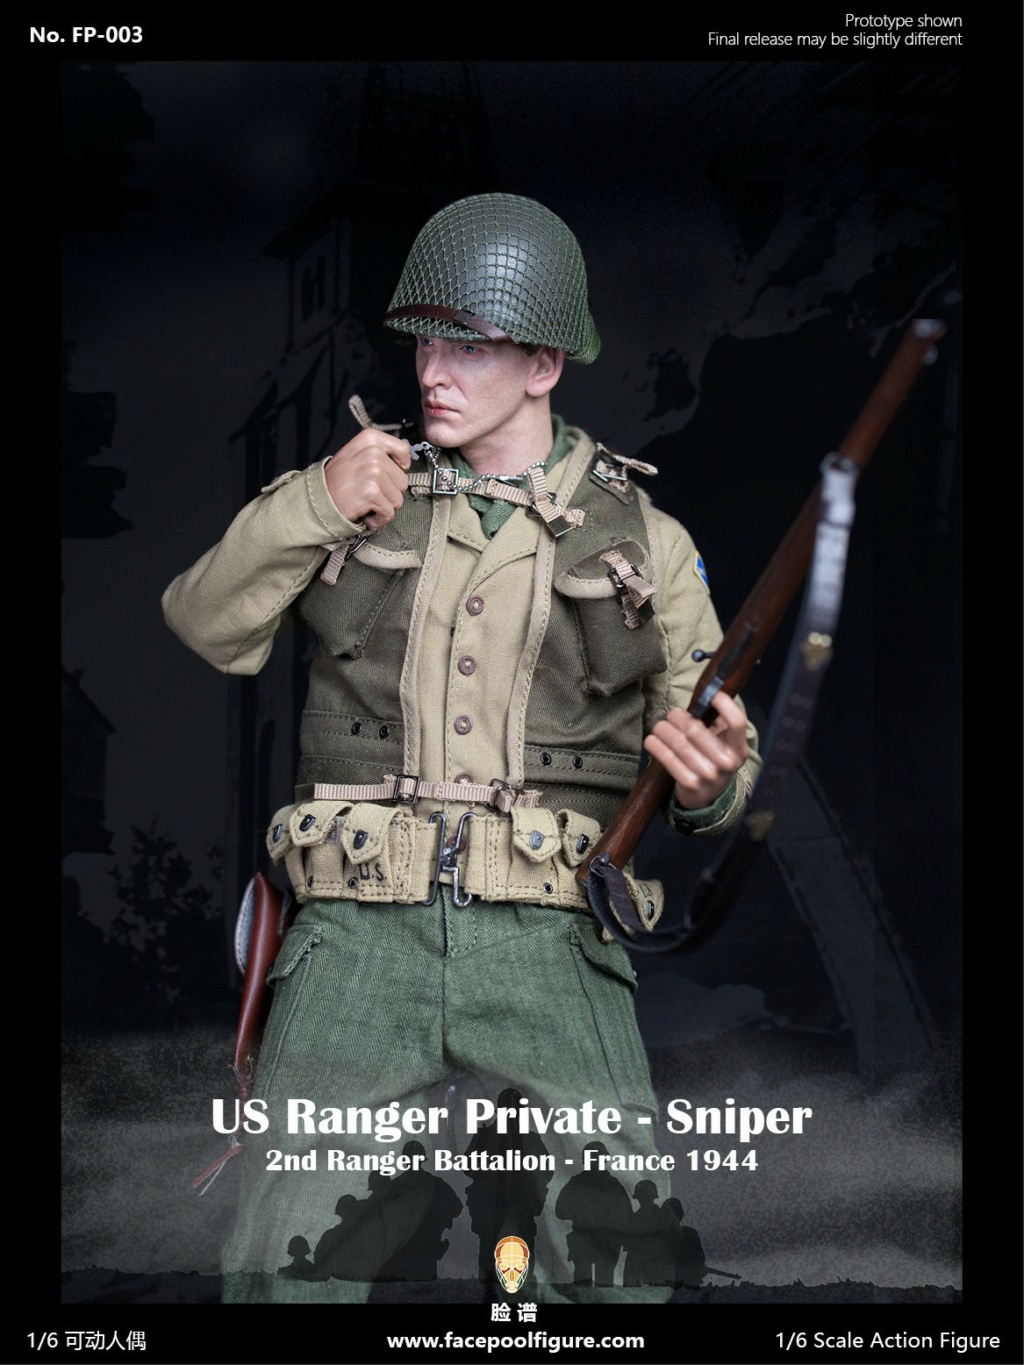 male - NEW PRODUCT: Facepool: 1/6 WWII Ranger Sniper FP003-Double-headed sculpture + bell tower platform  09173710